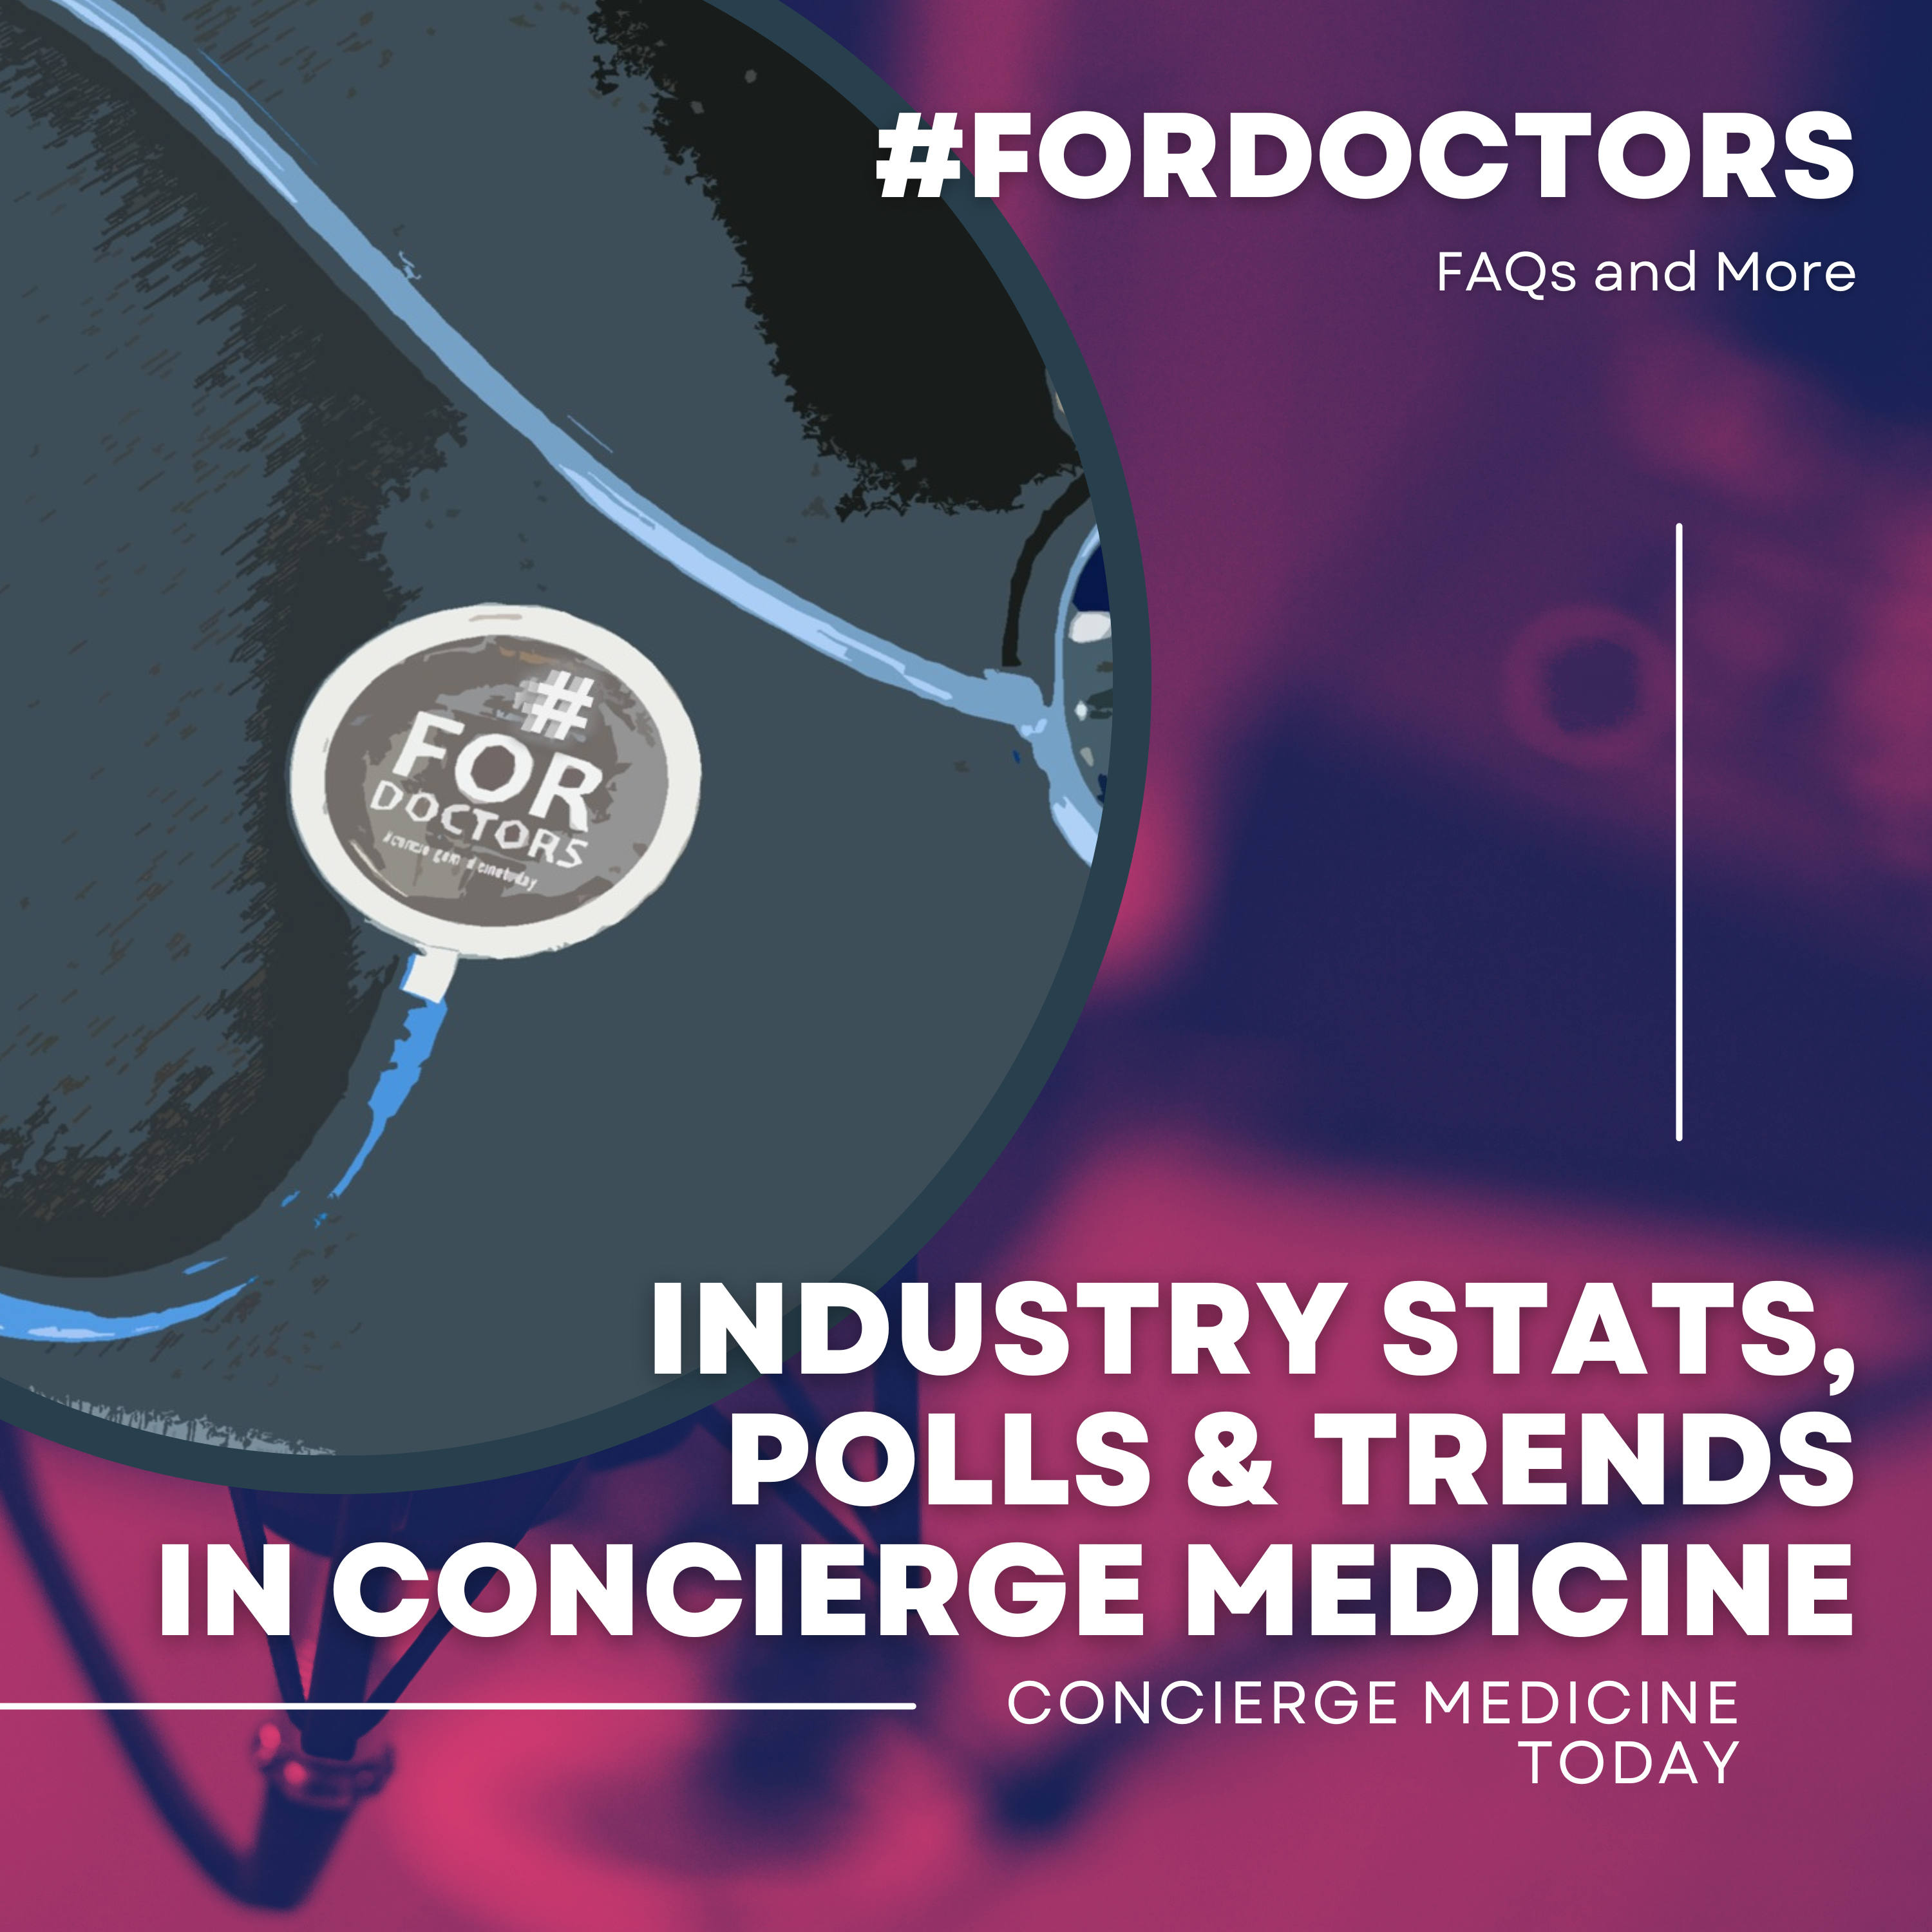 How Long Do Patients Stay Under The Care of Their Concierge Medicine Physician?